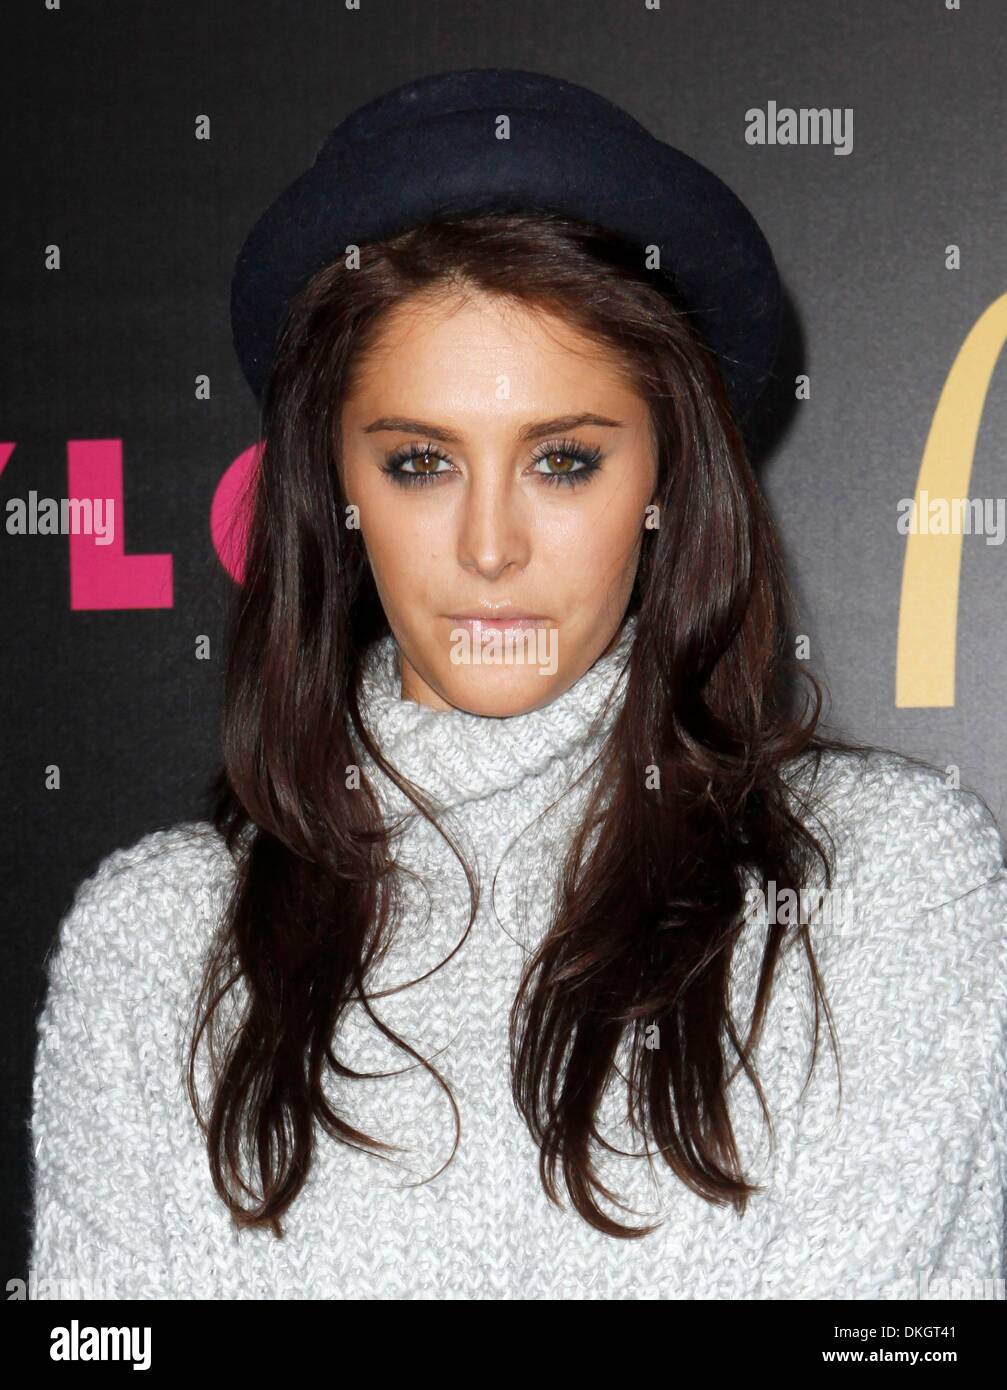 Los Angeles, CA, USA. 5th Dec, 2013. Moxie Raia at arrivals for NYLON Magazine December Issue Celebration, Smashbox Studios West Hollywood, Los Angeles, CA December 5, 2013. Credit:  Emiley Schweich/Everett Collection/Alamy Live News Stock Photo